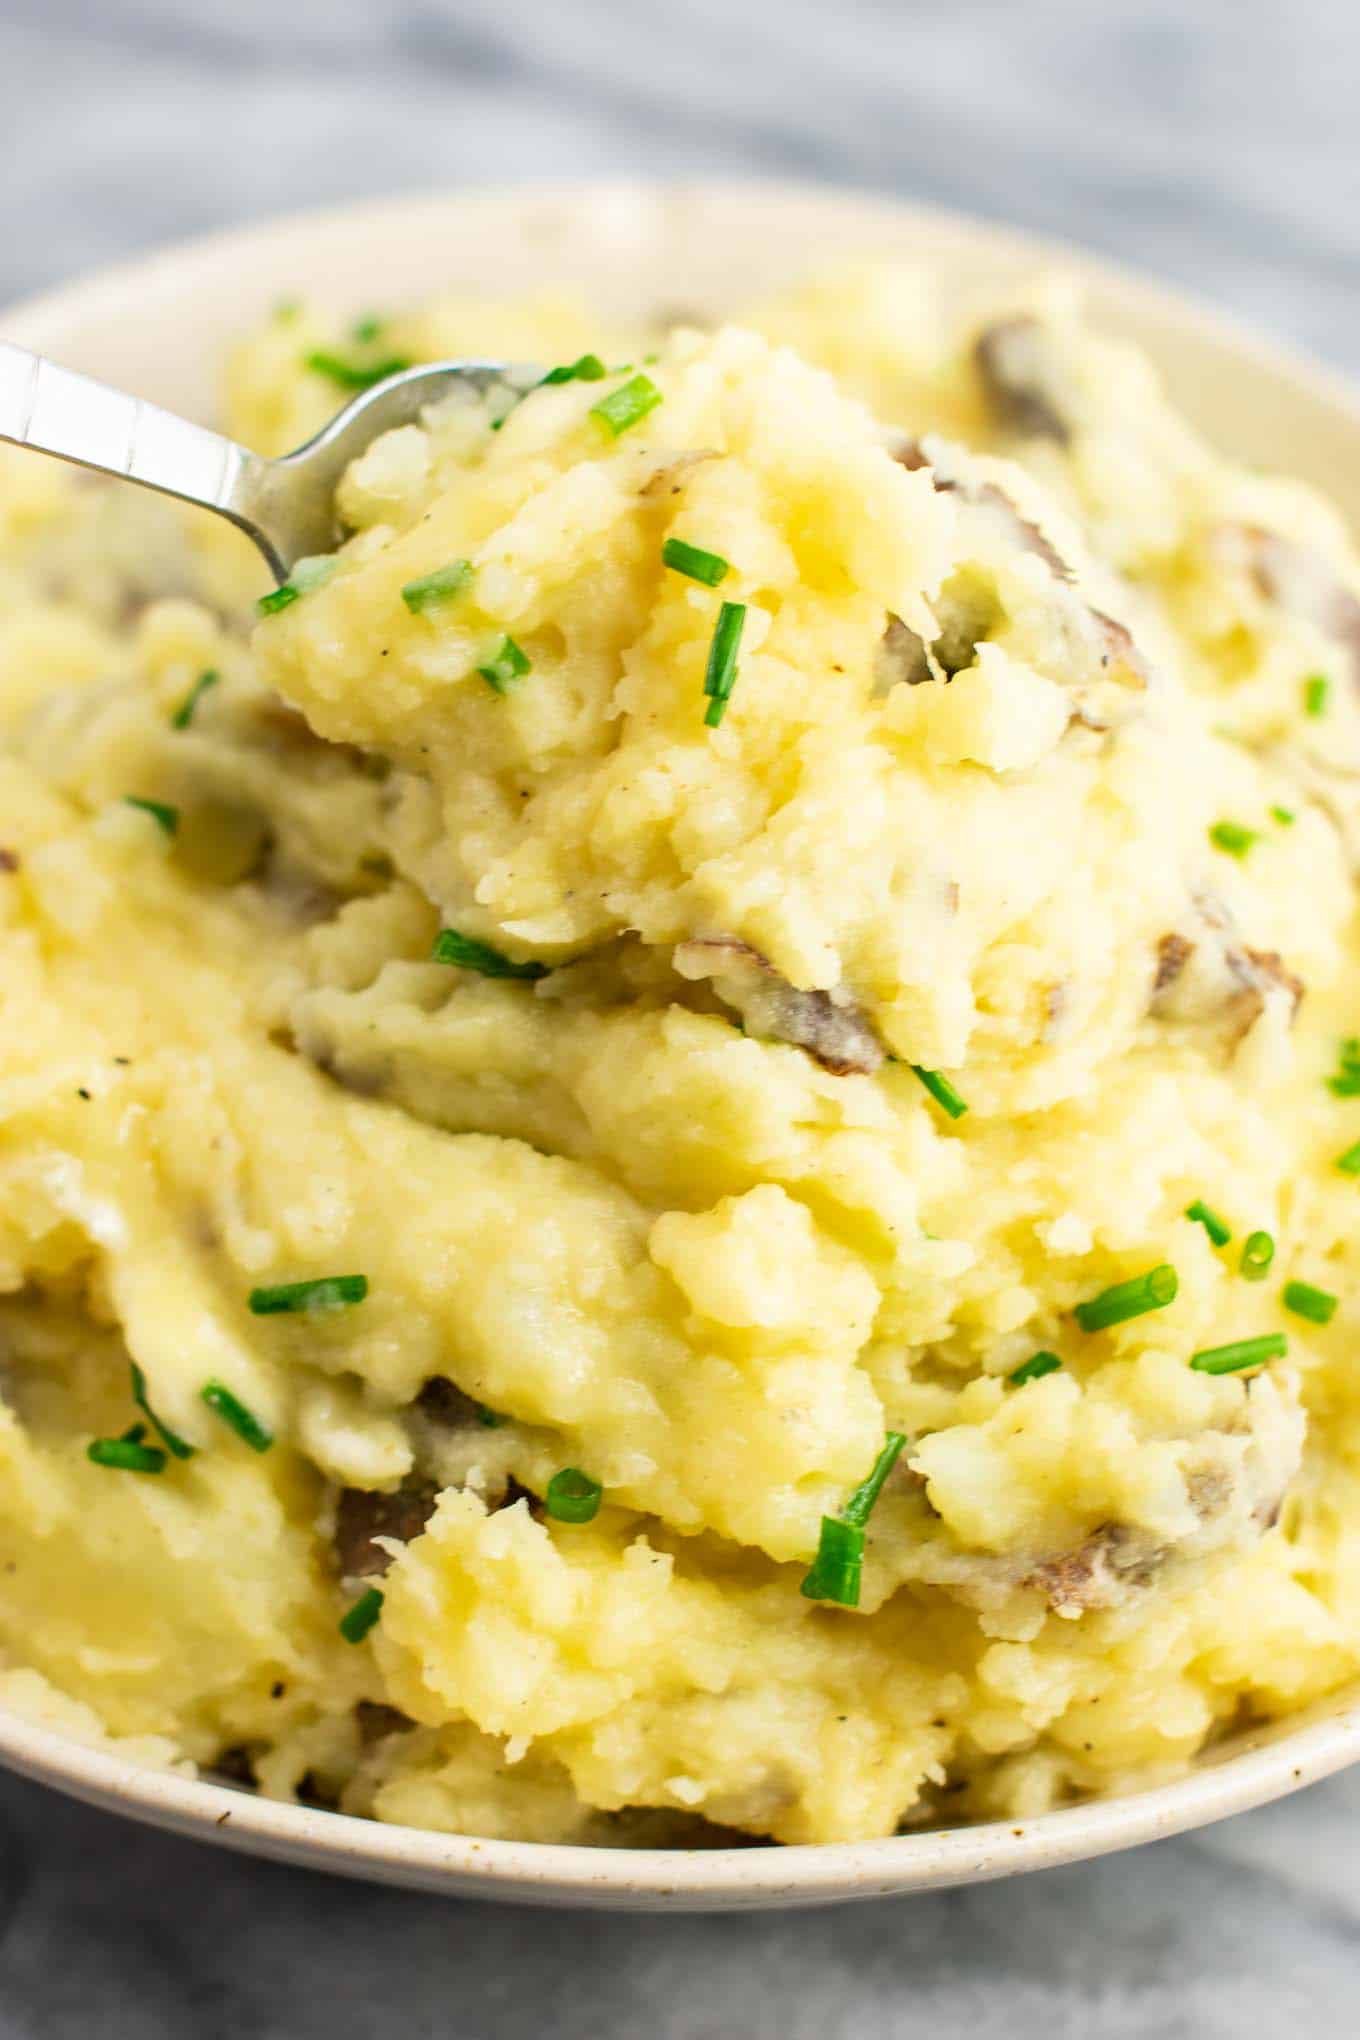 a spoon taking a scoop of mashed potatoes